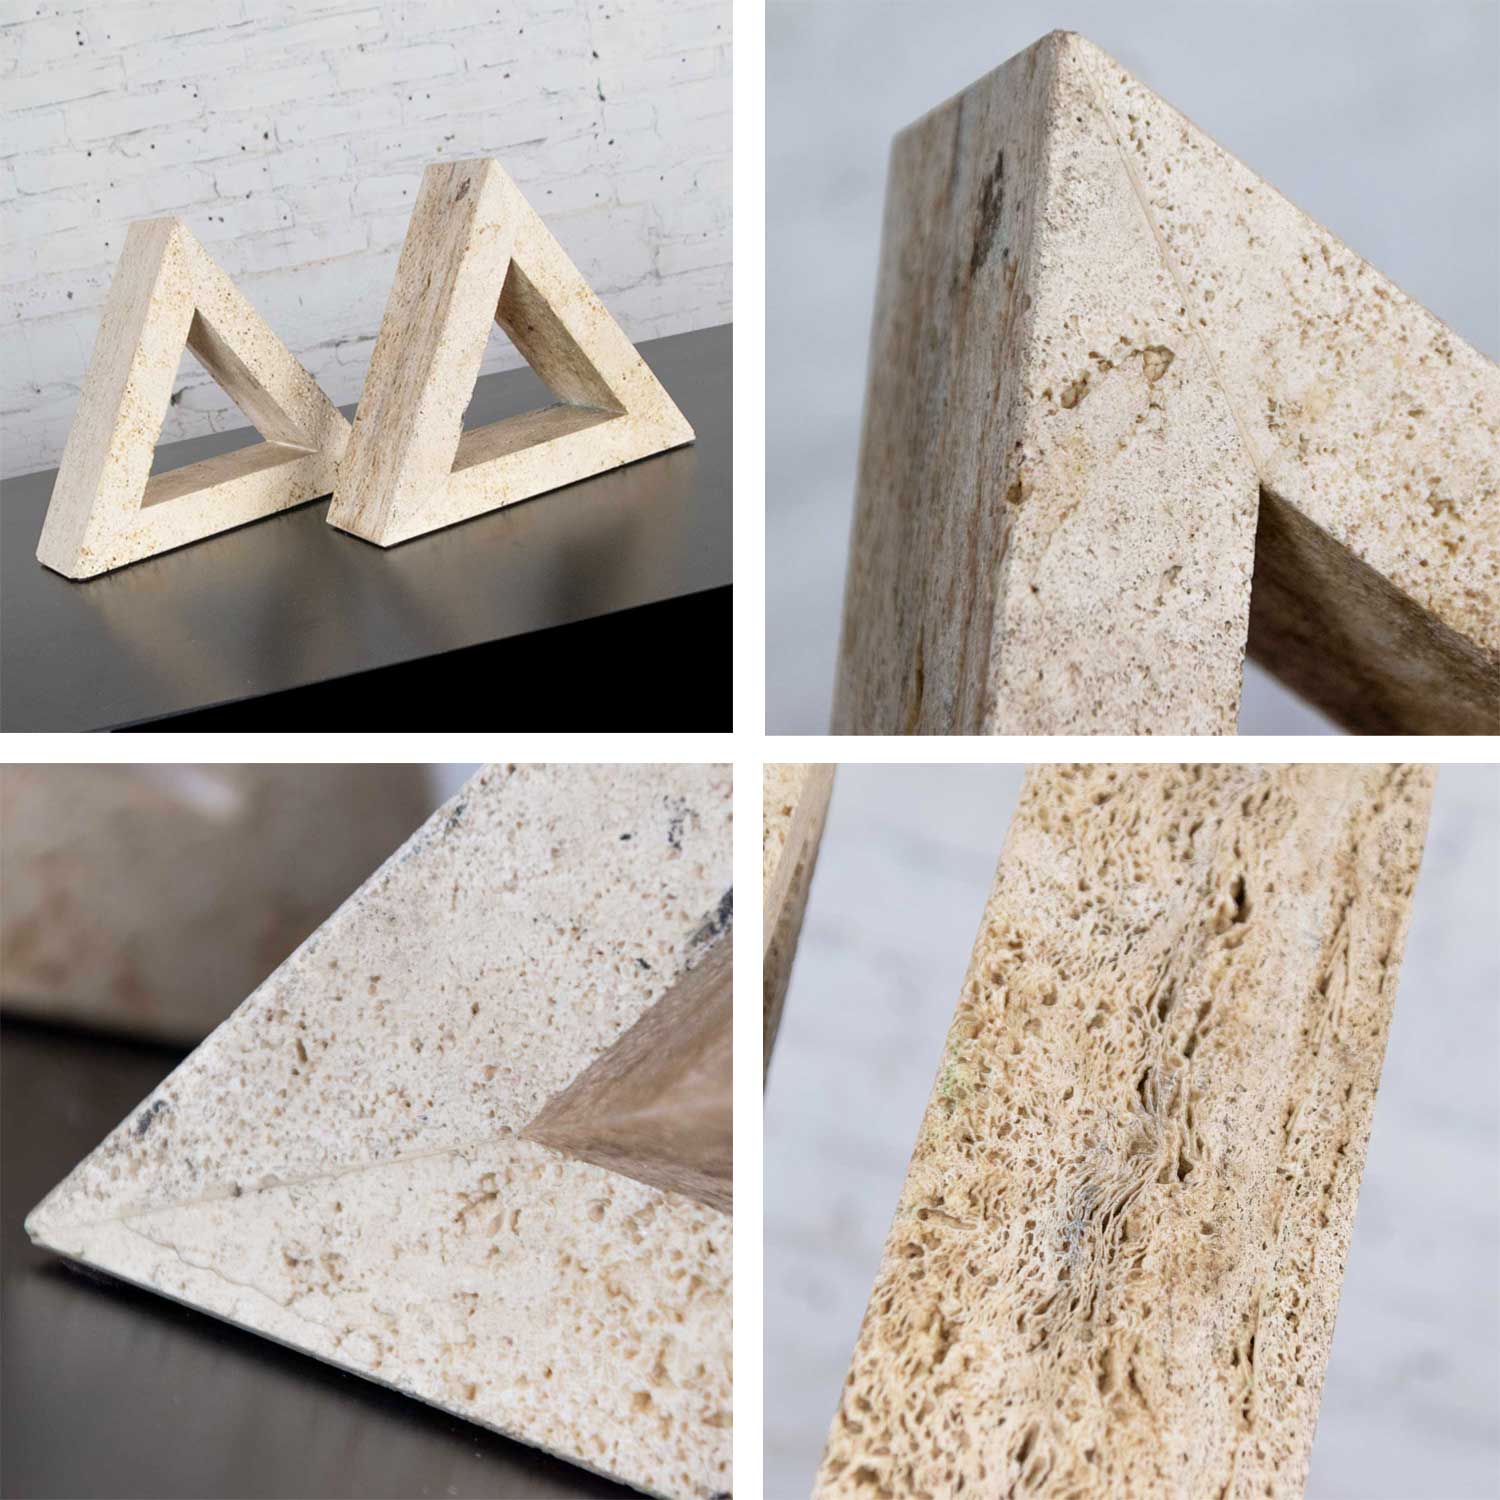 Modern Travertine Delta Shape Bookends Attributed to Fratelli Mannelli for Raymor